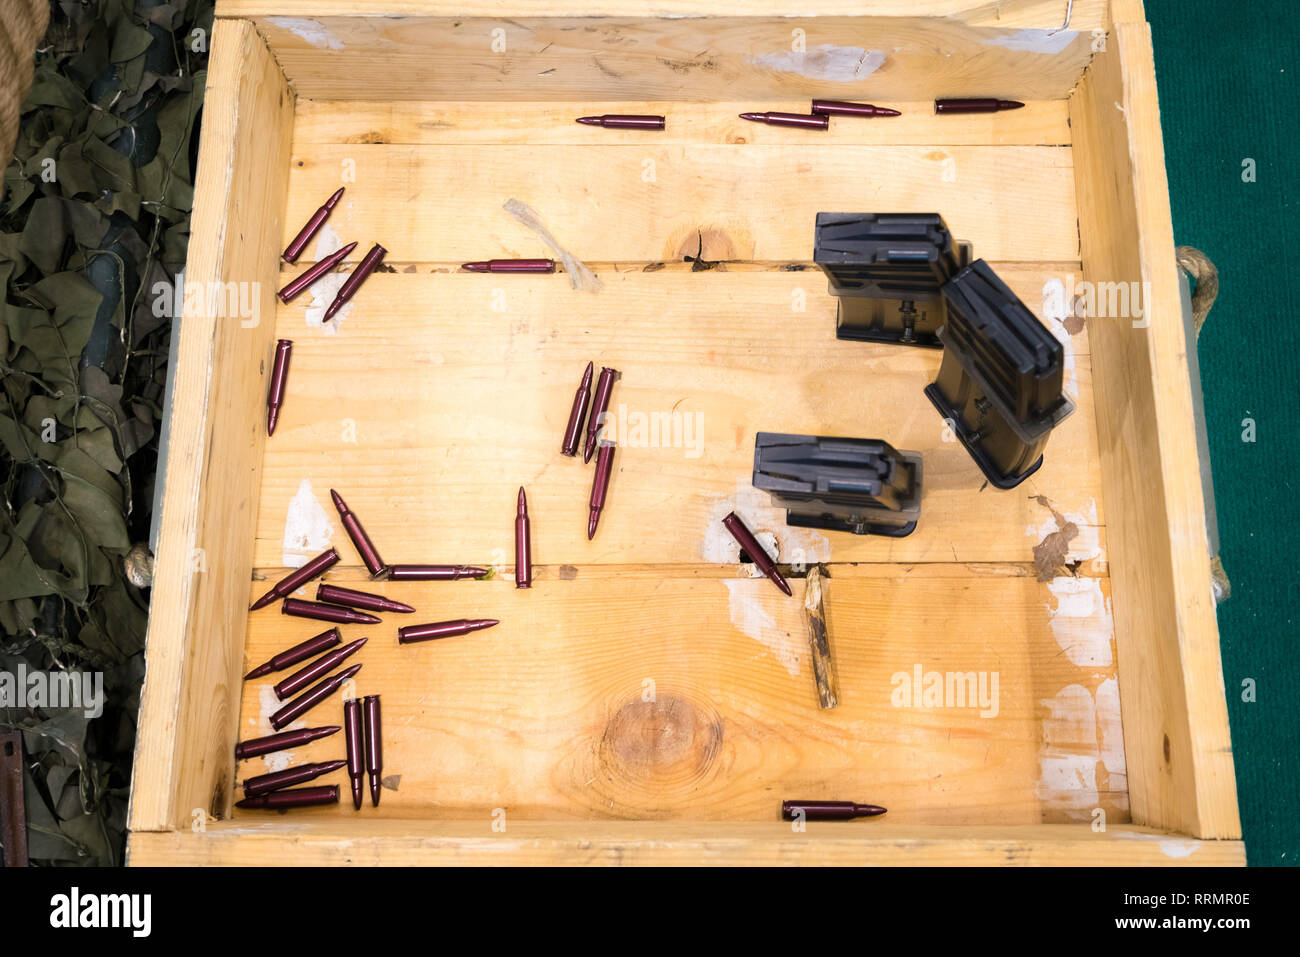 Dry Fire Training on a white background, Fake bullets made from red plastic  are used for shooting practice Stock Photo - Alamy